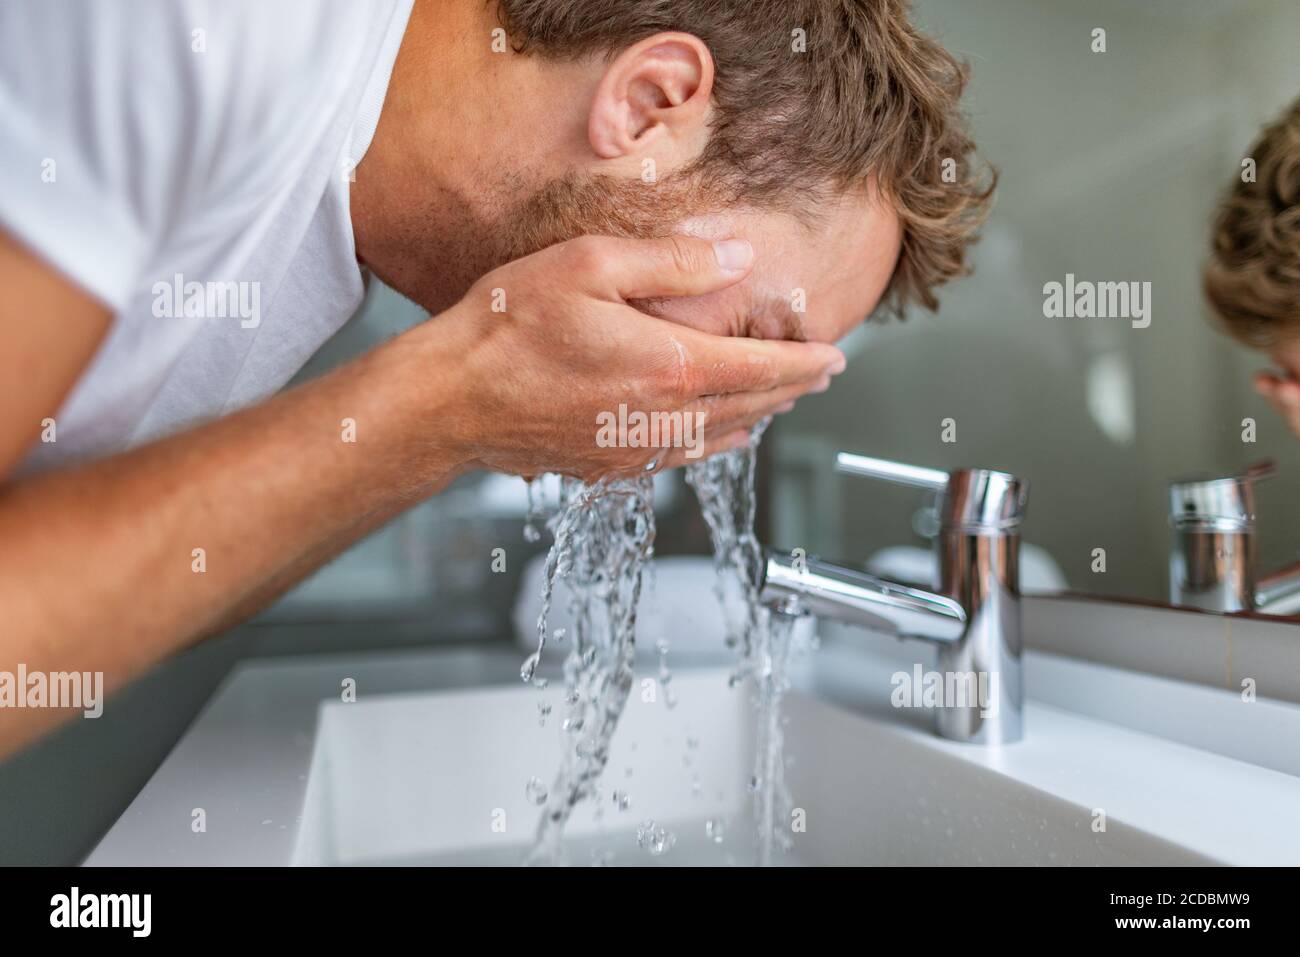 Face wash man in bathroom washing cleansing for acne facial treatment in sink splashing cold water onto face. Men beauty skincare lifestyle Stock Photo